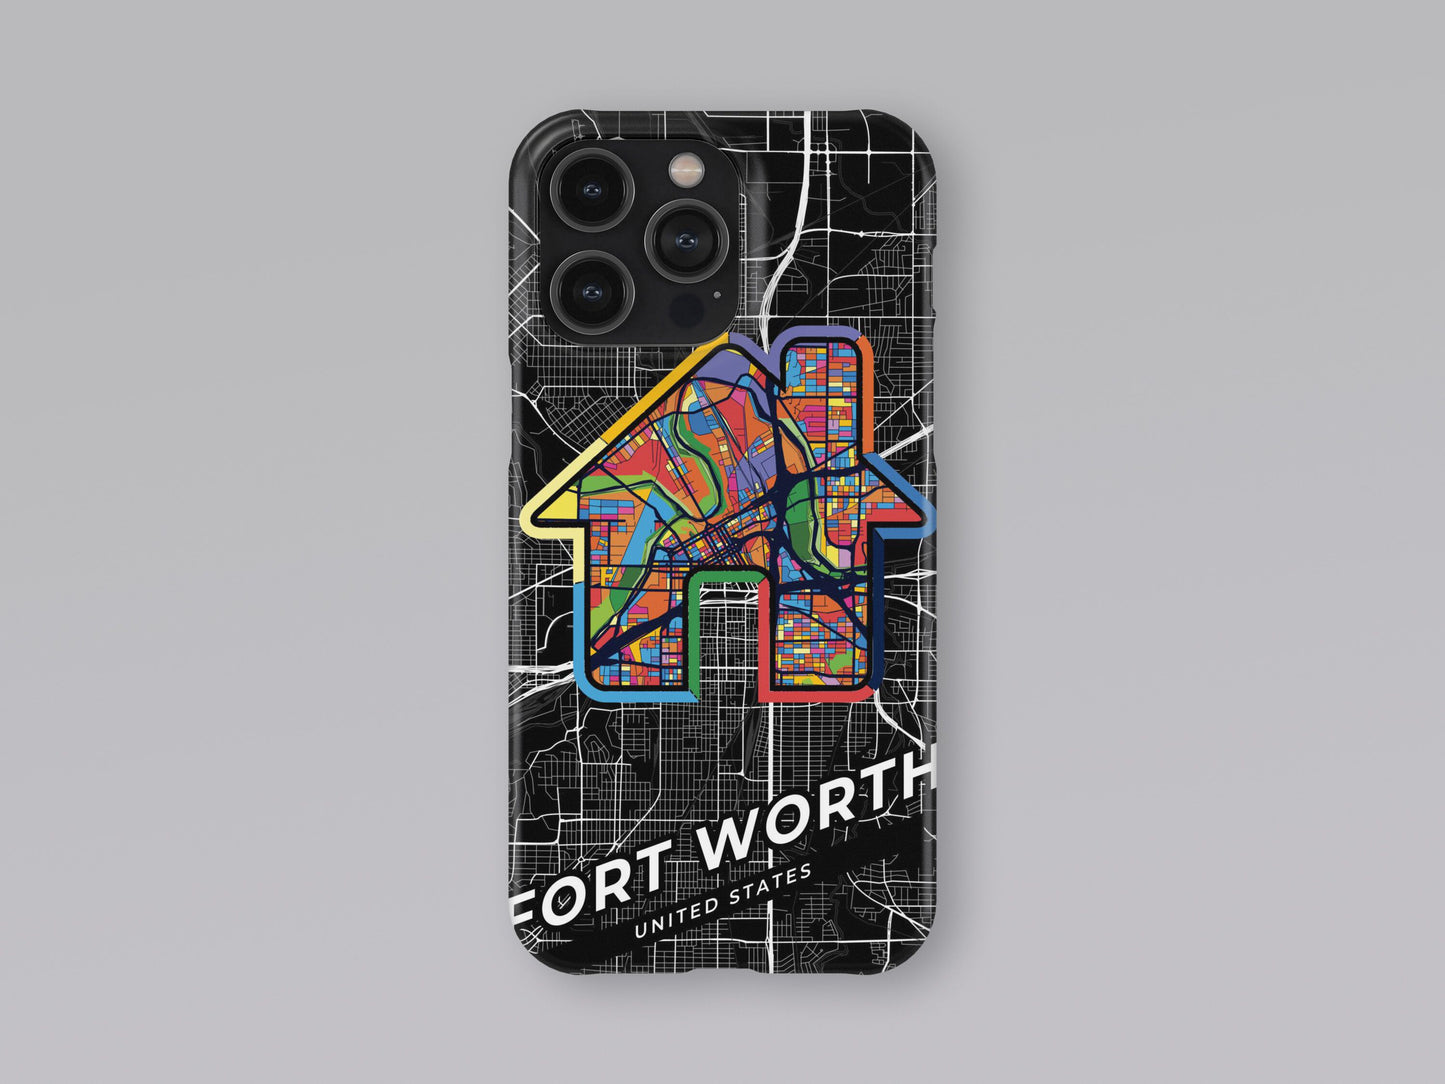 Fort Worth Texas slim phone case with colorful icon. Birthday, wedding or housewarming gift. Couple match cases. 3